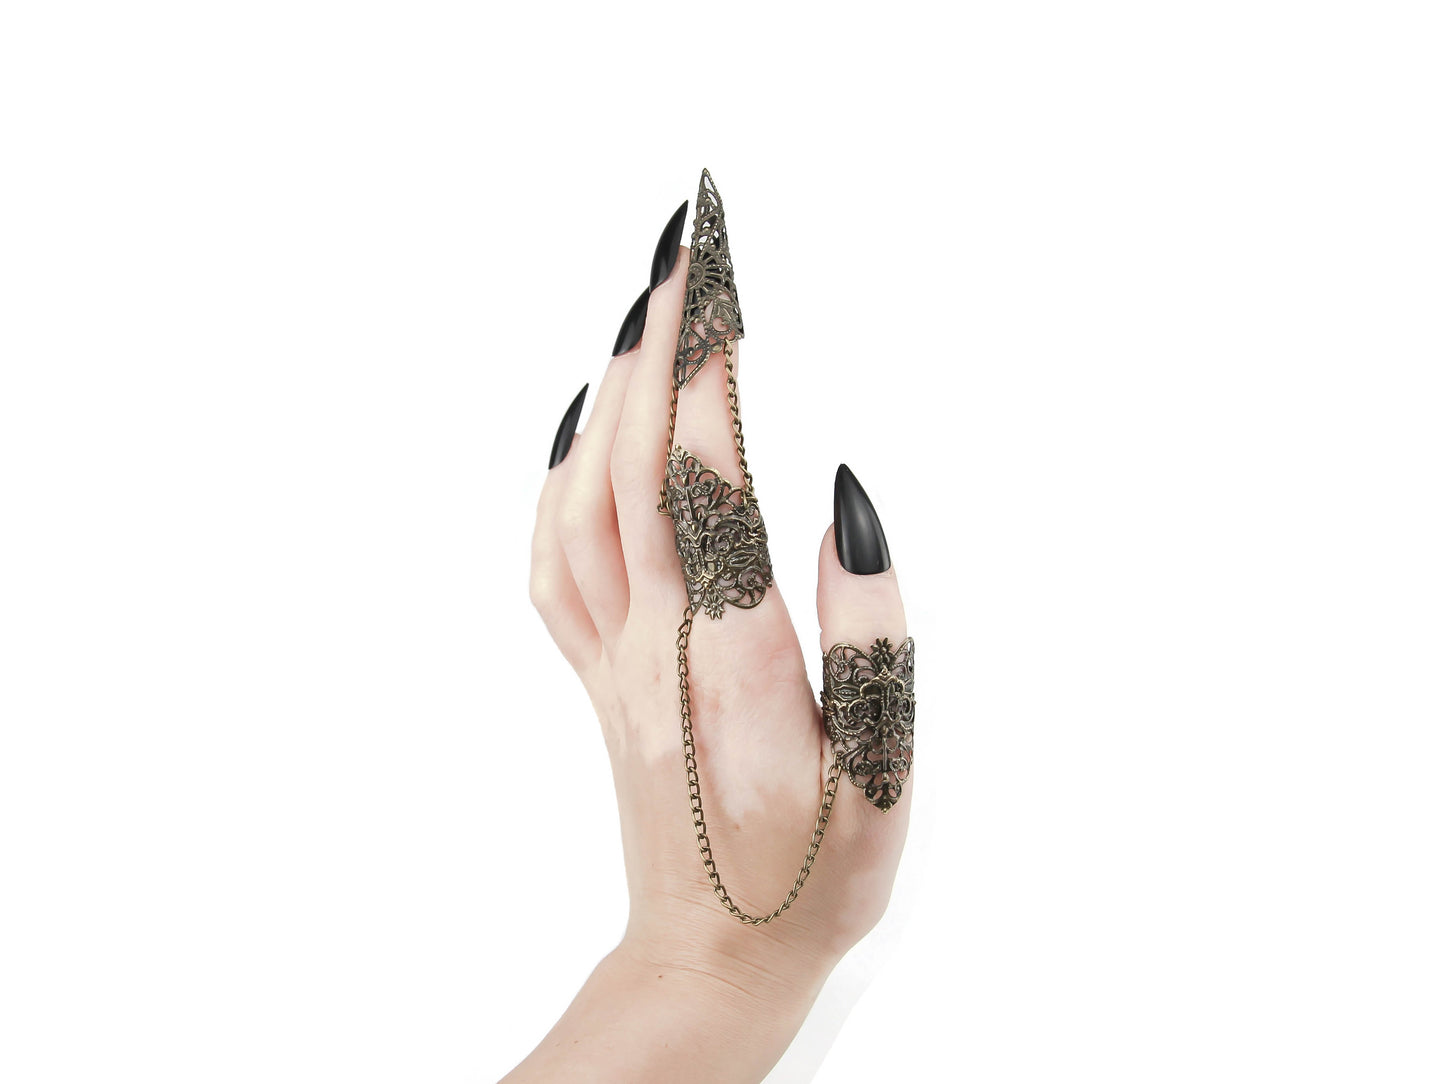 A hand adorned with Myril Jewels' gothic double ring in bronze, exuding dark avant-garde elegance with nail claw design. Perfect for those who cherish neo-gothic jewels and bold, witchcore aesthetics, this piece serves as a distinctive statement for Halloween, rave parties, or as a daring goth girlfriend gift